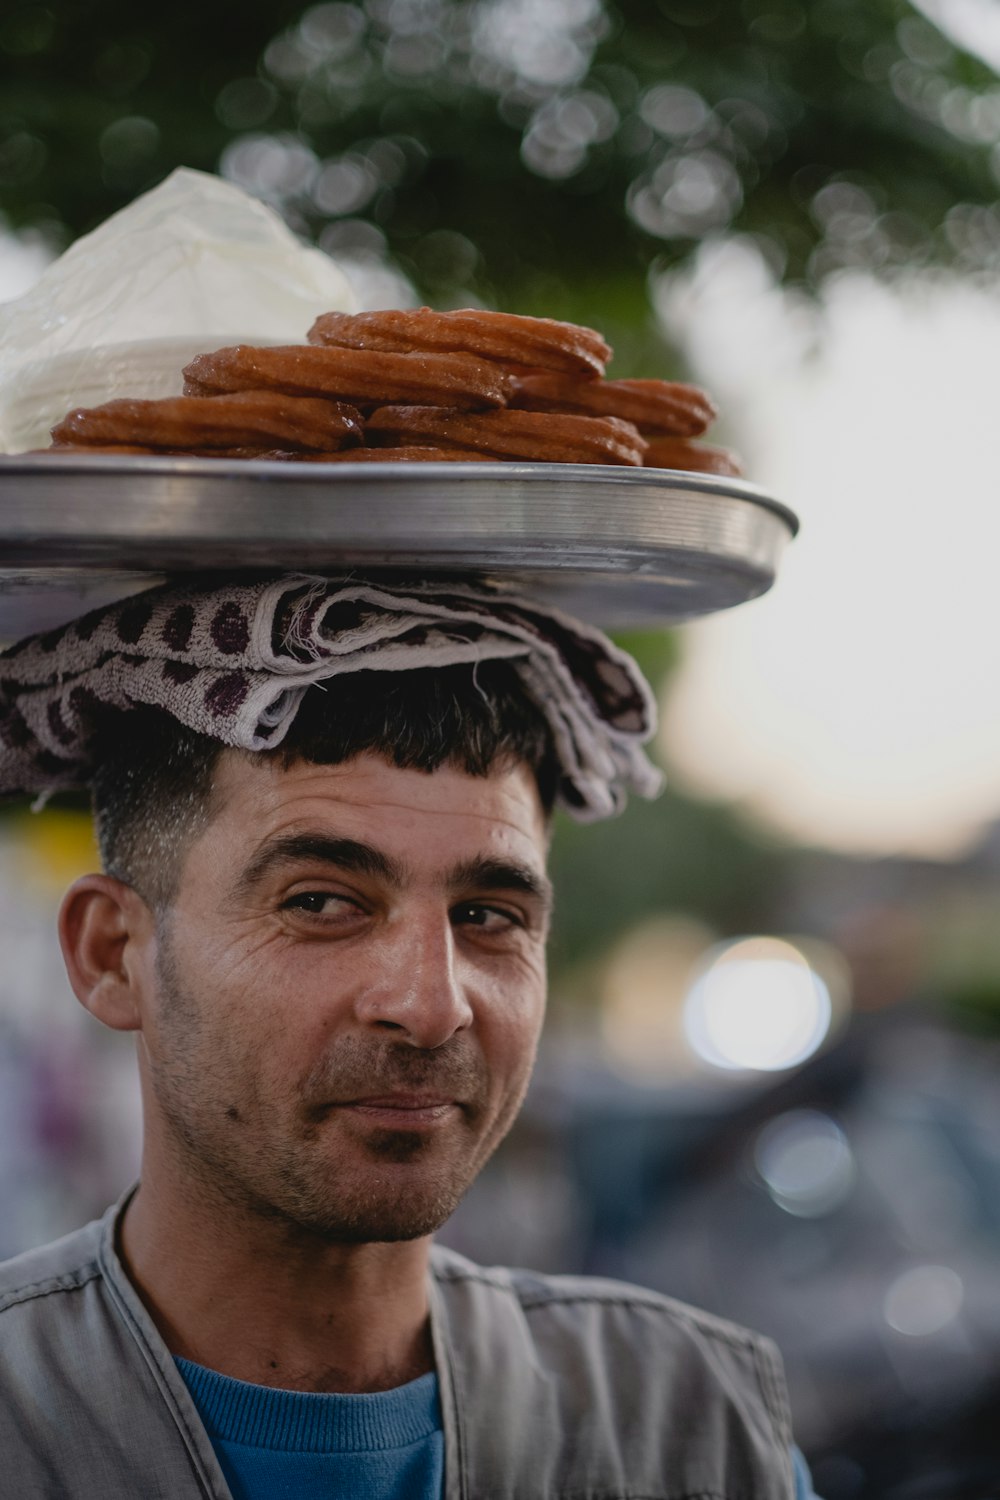 a man with a tray of donuts on his head